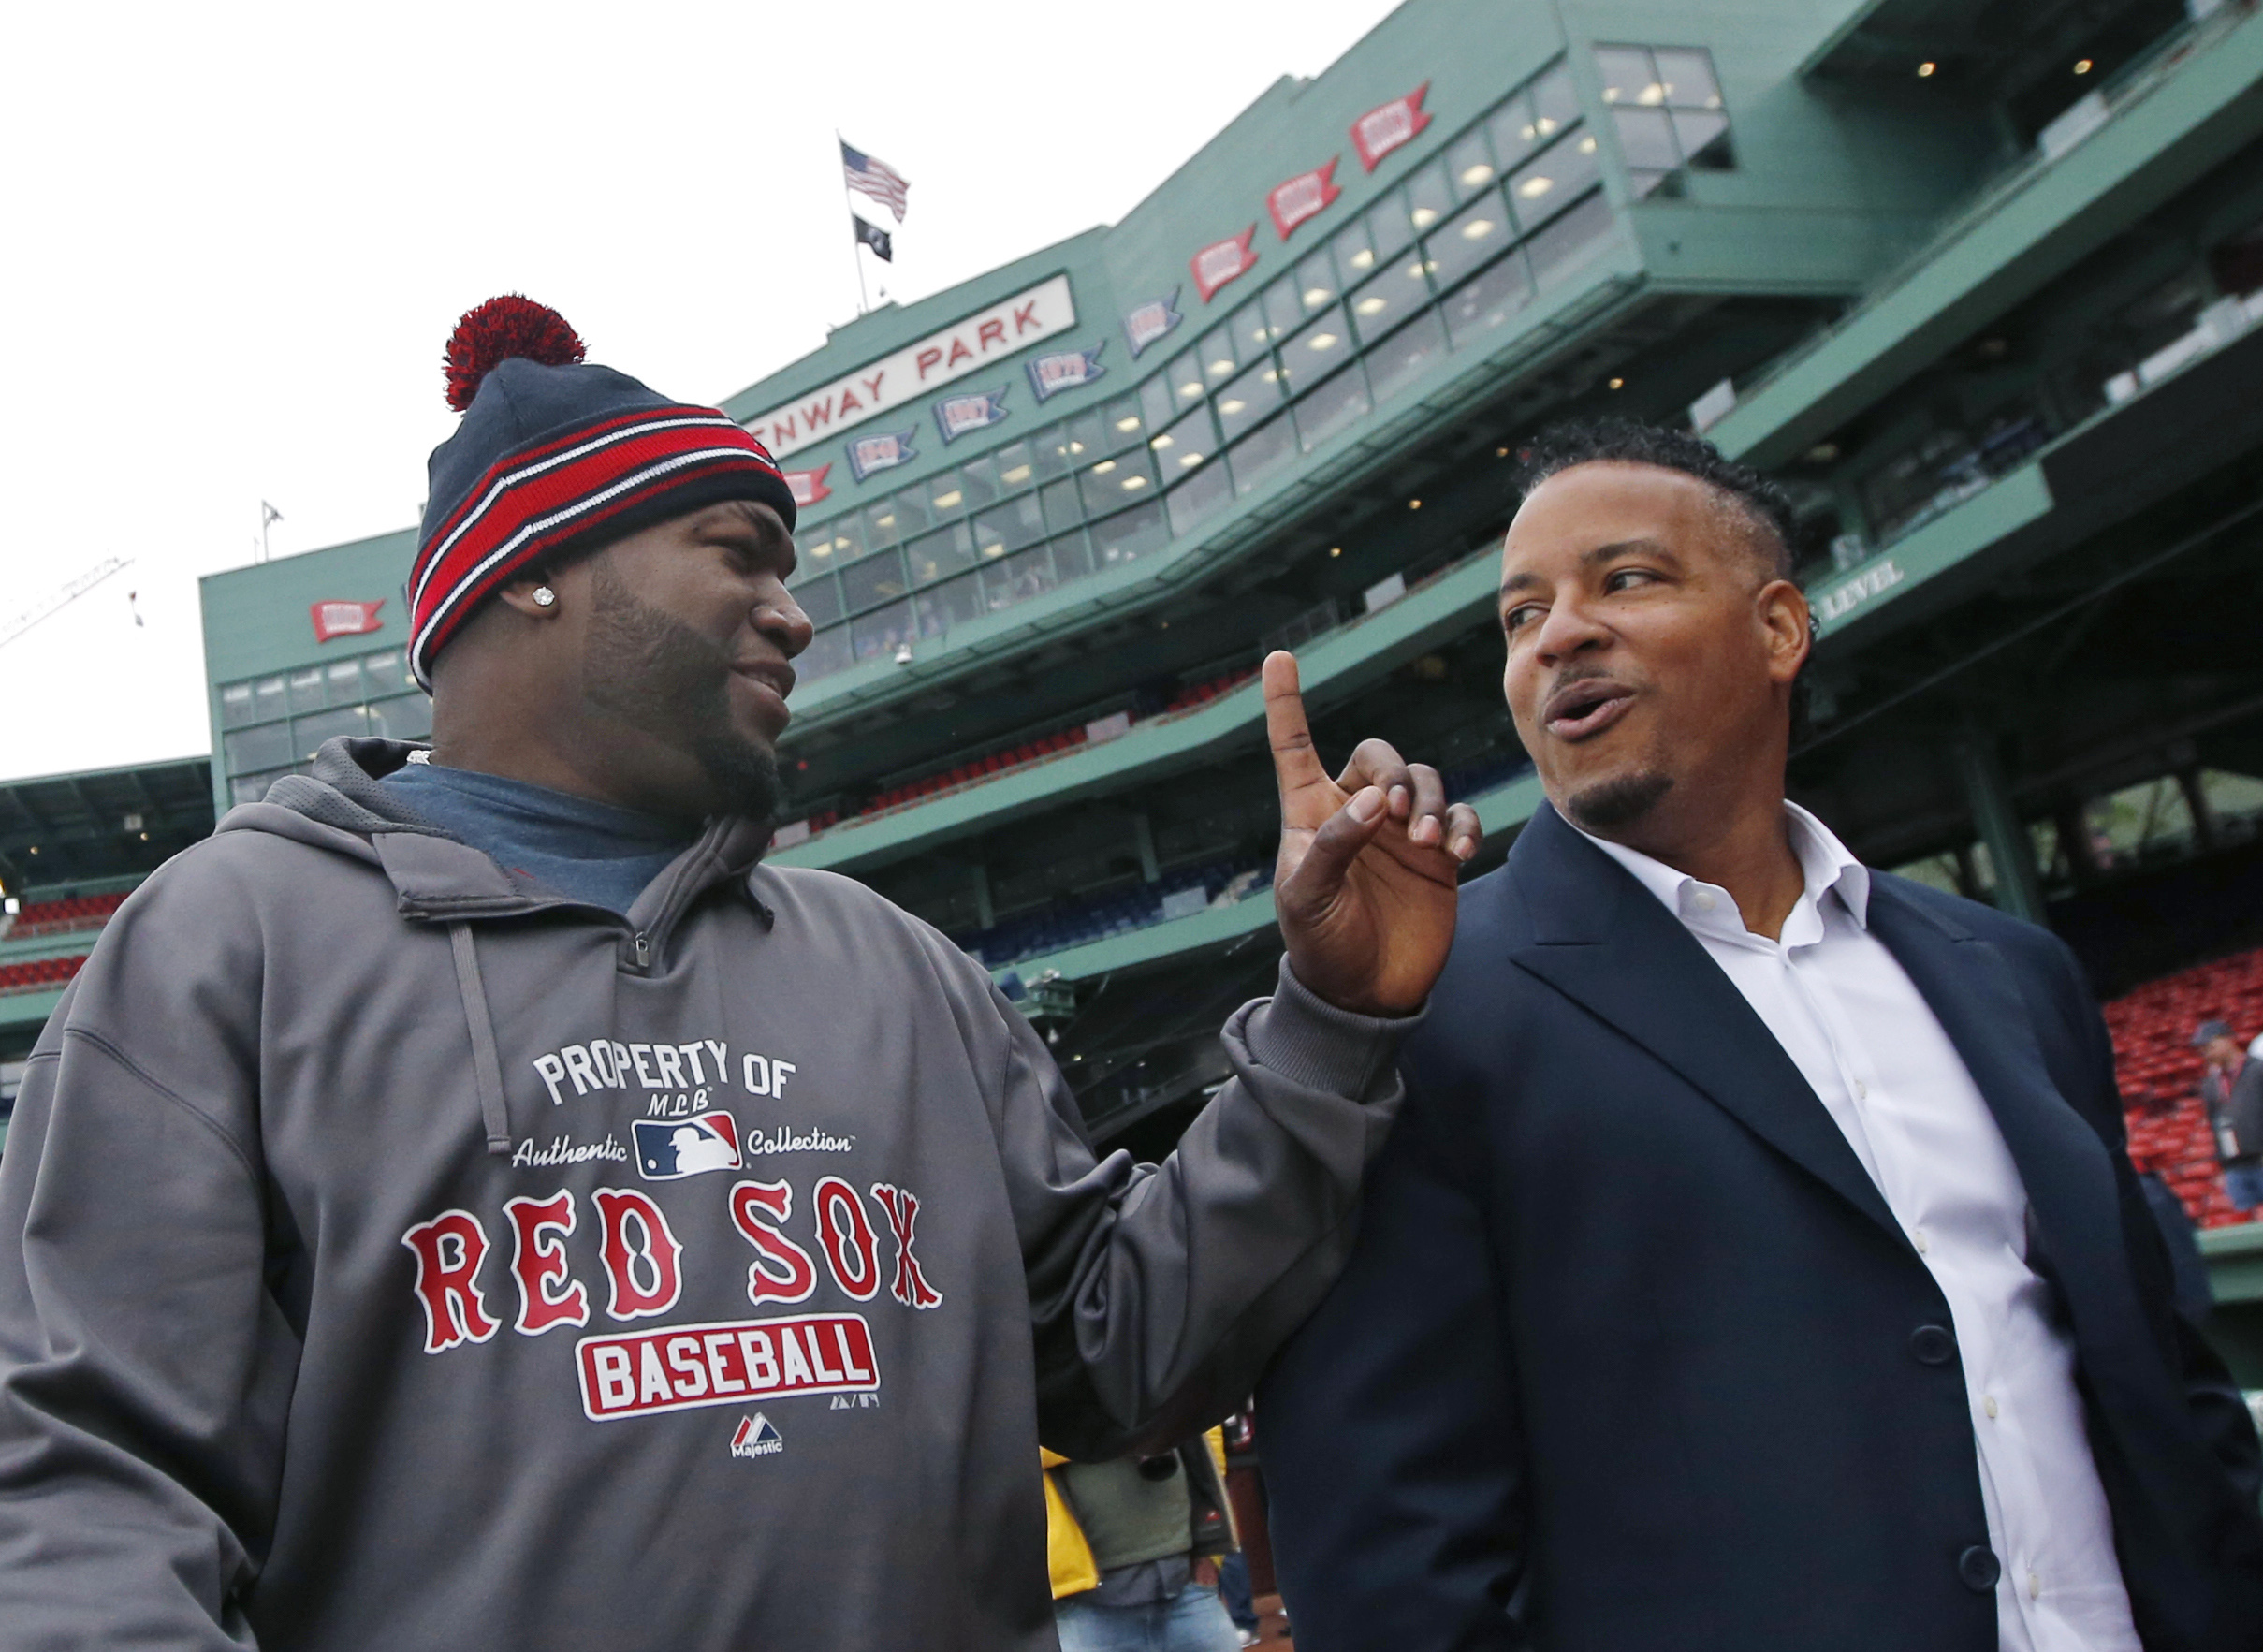 David Ortiz: Not seeing ex-Red Sox teammate Manny Ramirez in the